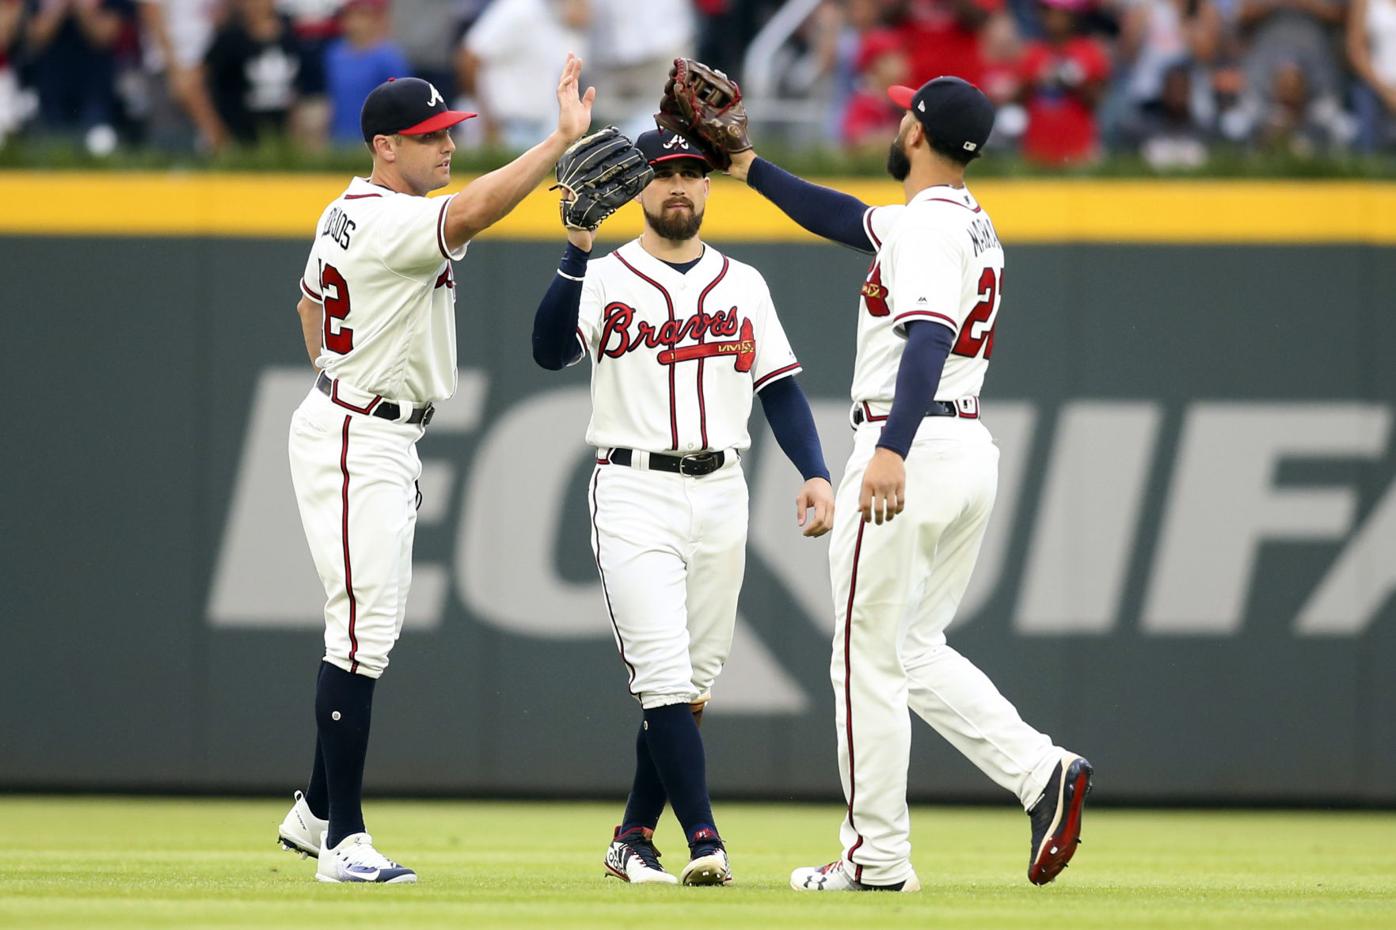 Sean Newcomb, Charlie Culberson power Braves past Padres, 1-0